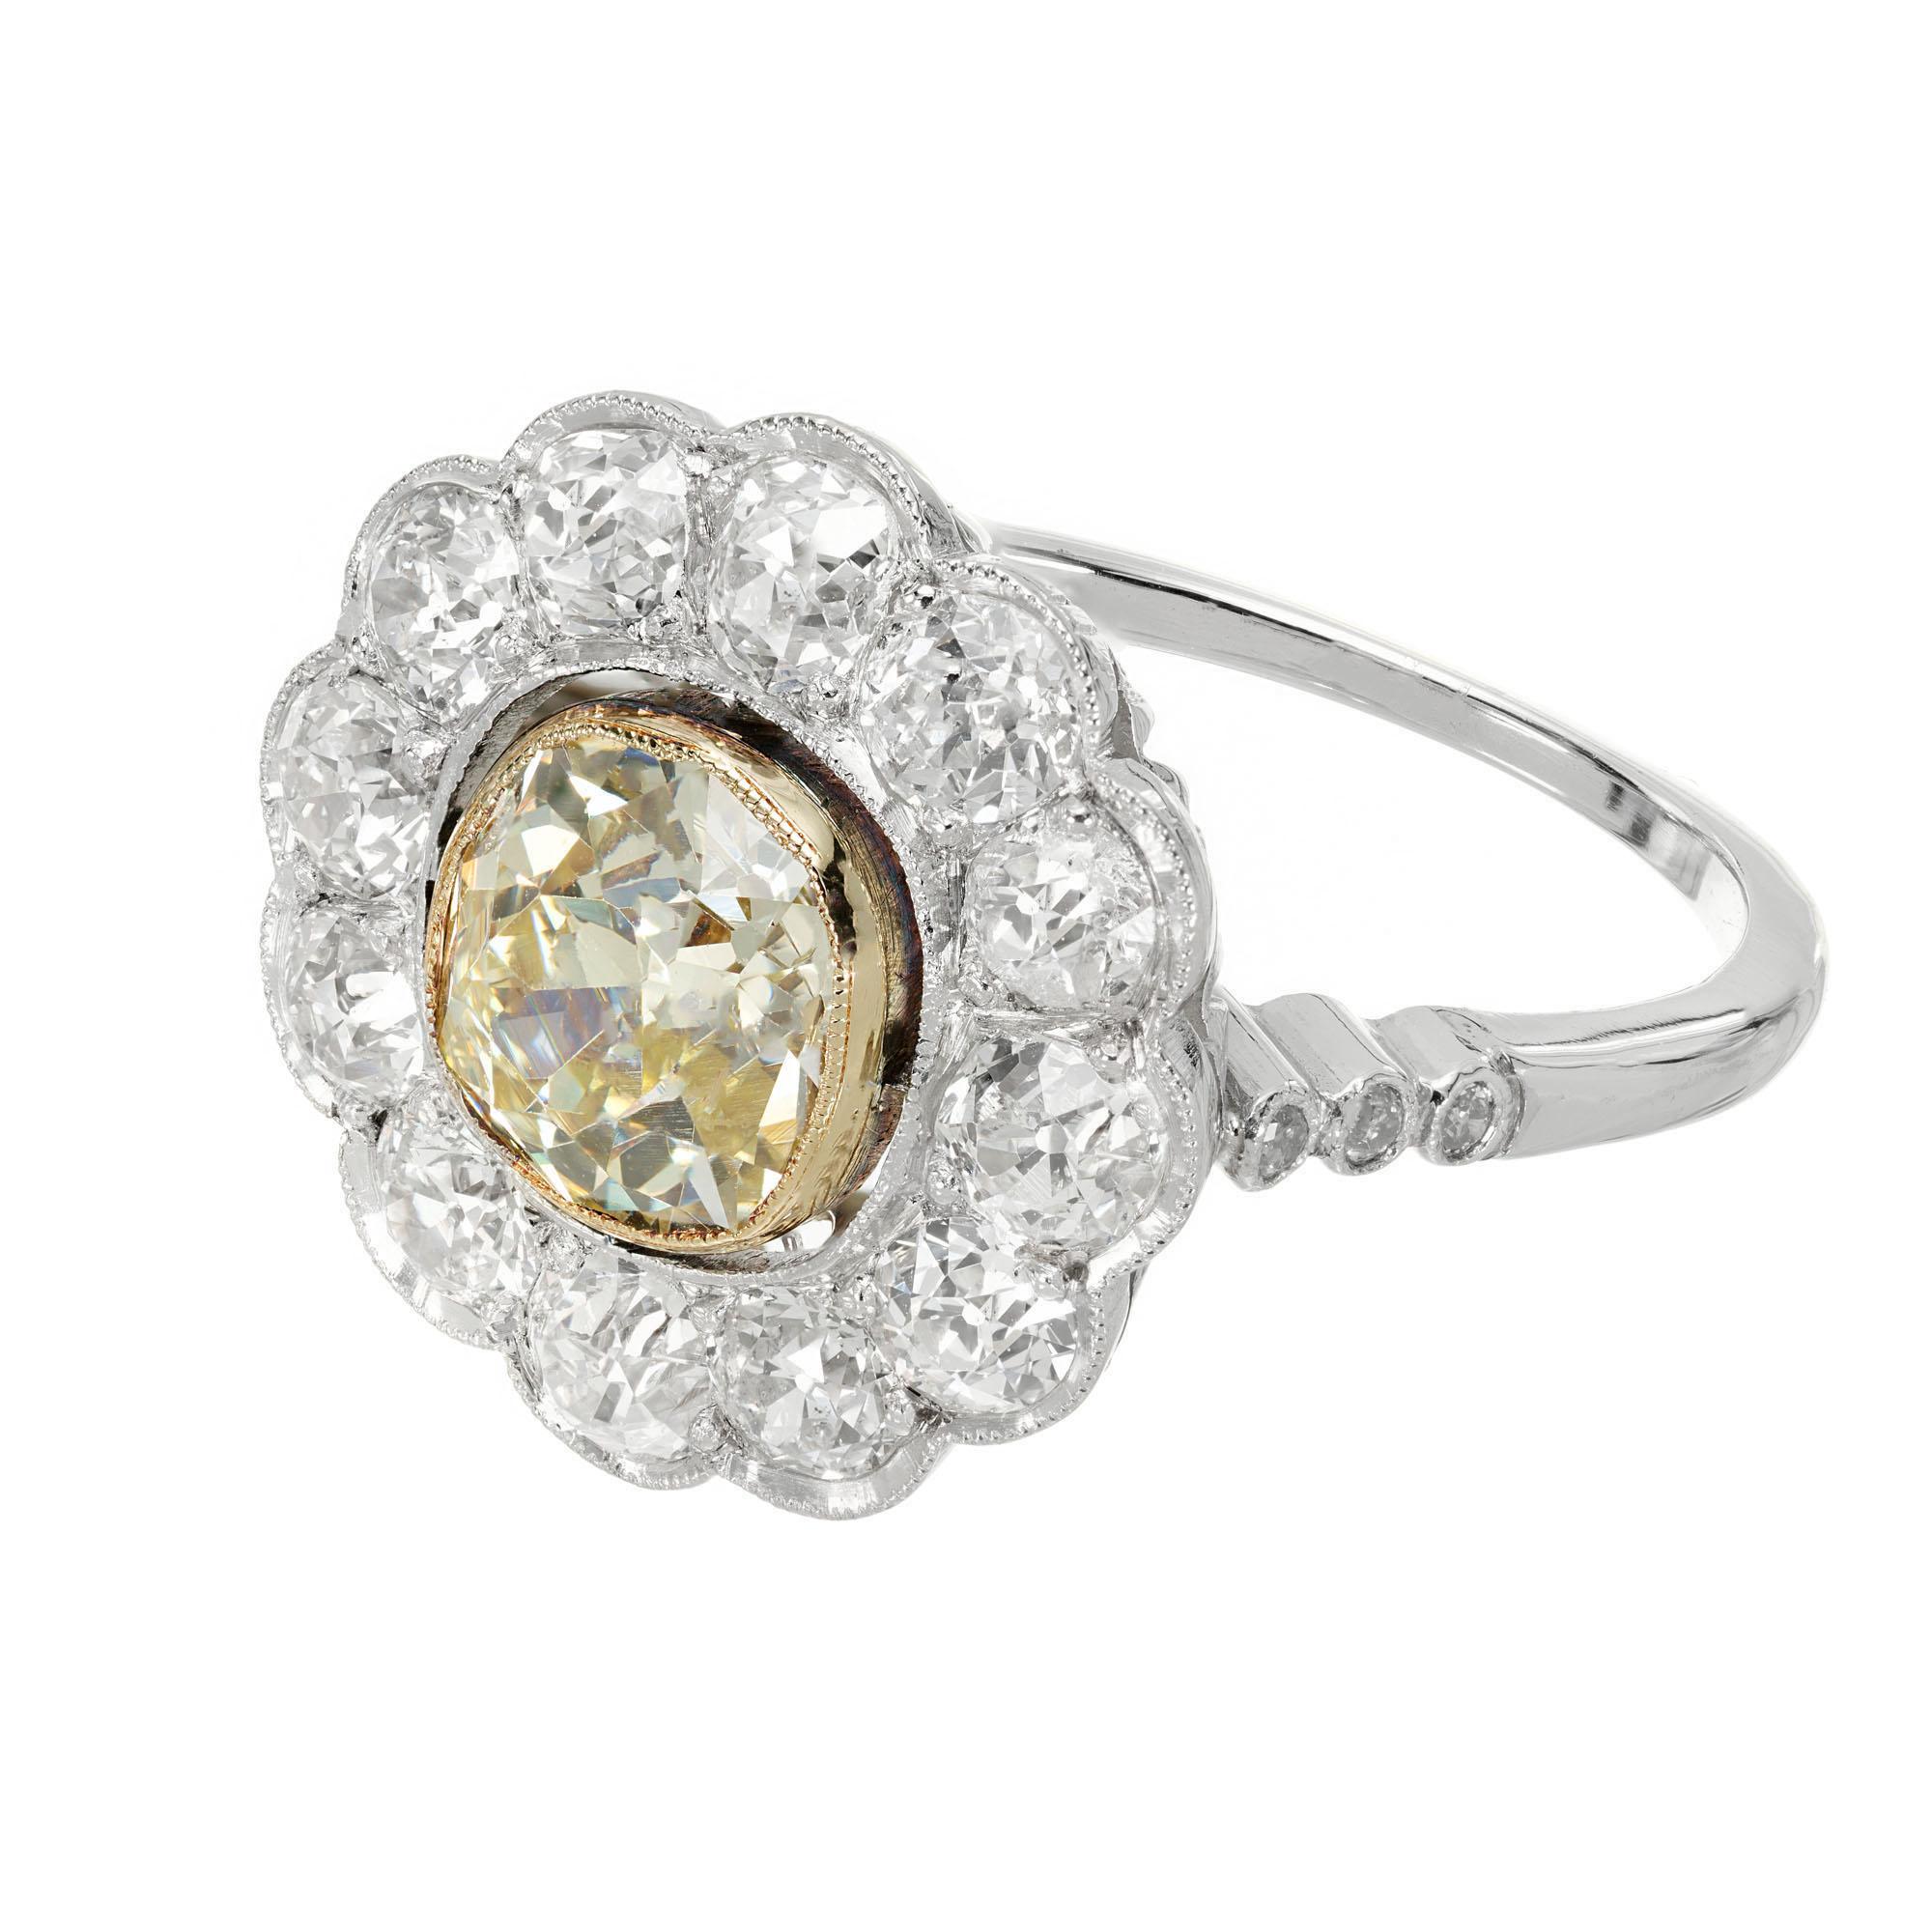  1900's yellow and white diamond halo engagement ring. GIA 1.39ct bezel set old mine brilliant cut fancy yellow diamond center stone with a halo of  12 round old mine cut diamonds in a platinum setting with 6 side diamonds.

1 old mine brilliant cut